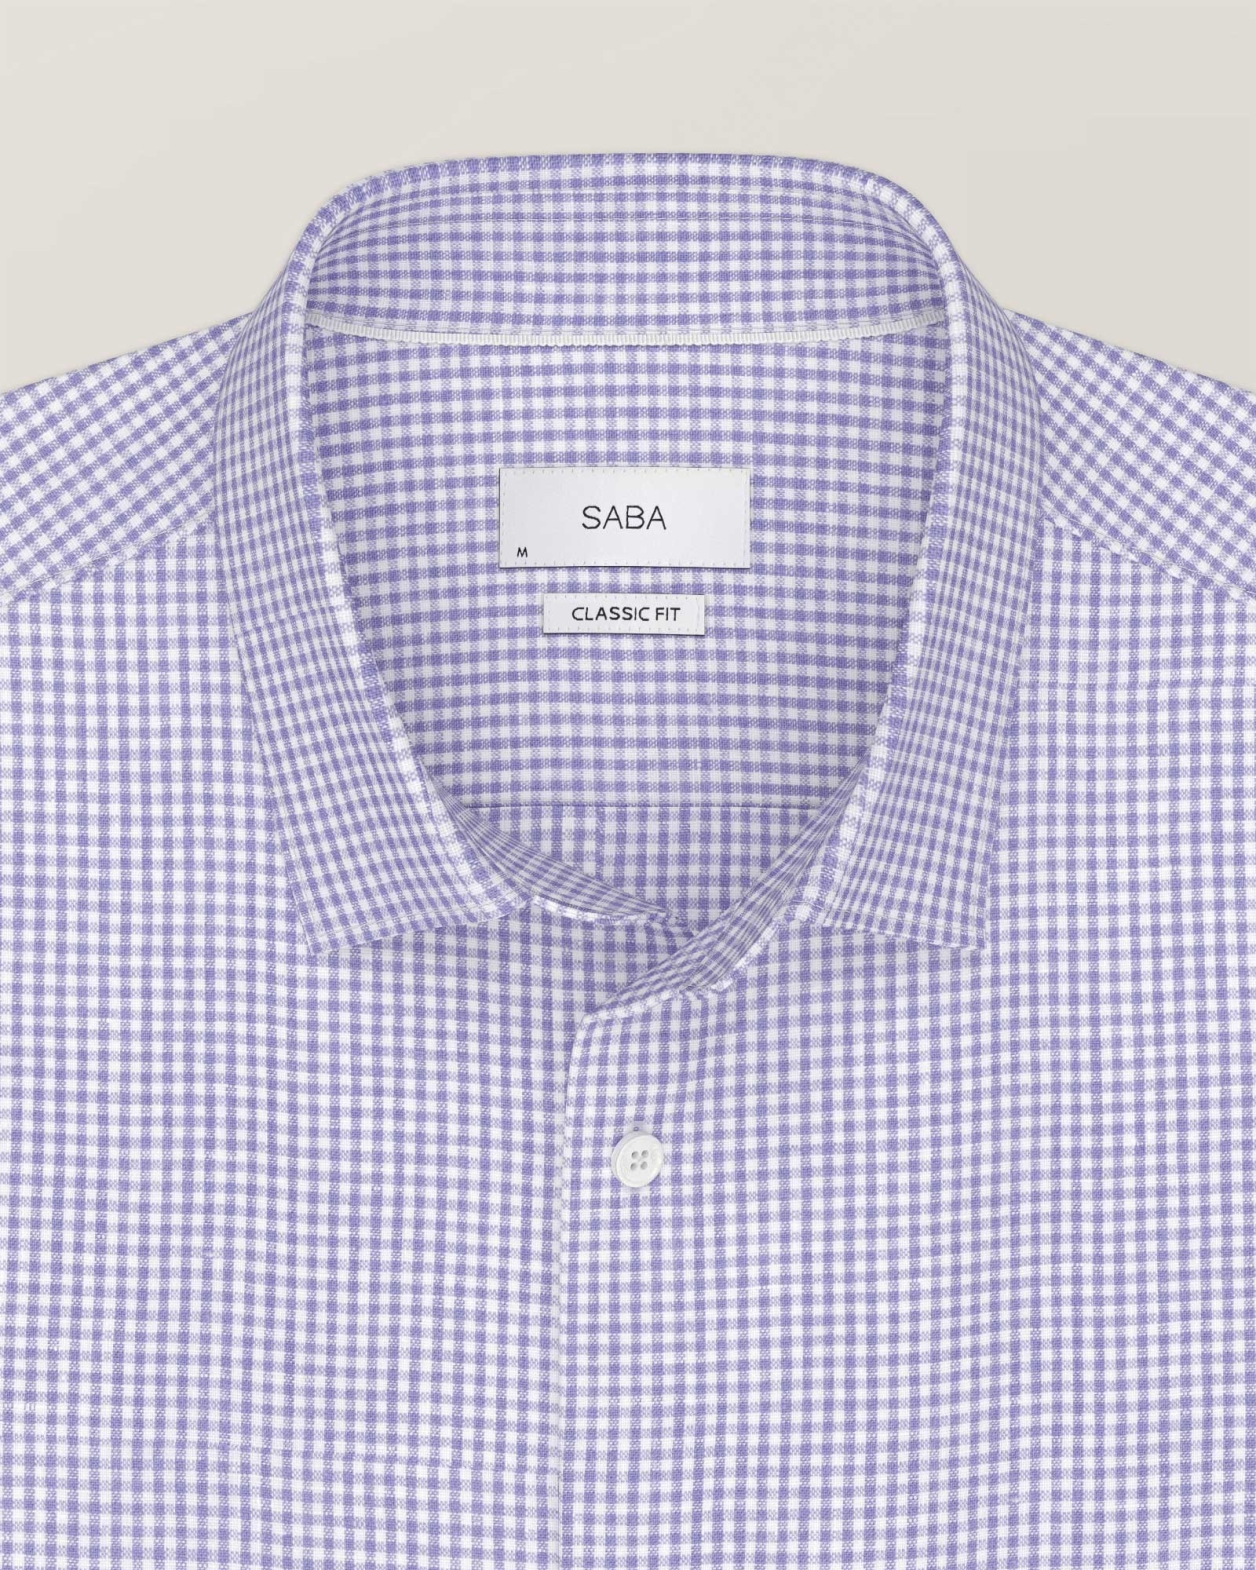 Anderson Long Sleeve Classic Check Shirt in PERIWINKLE